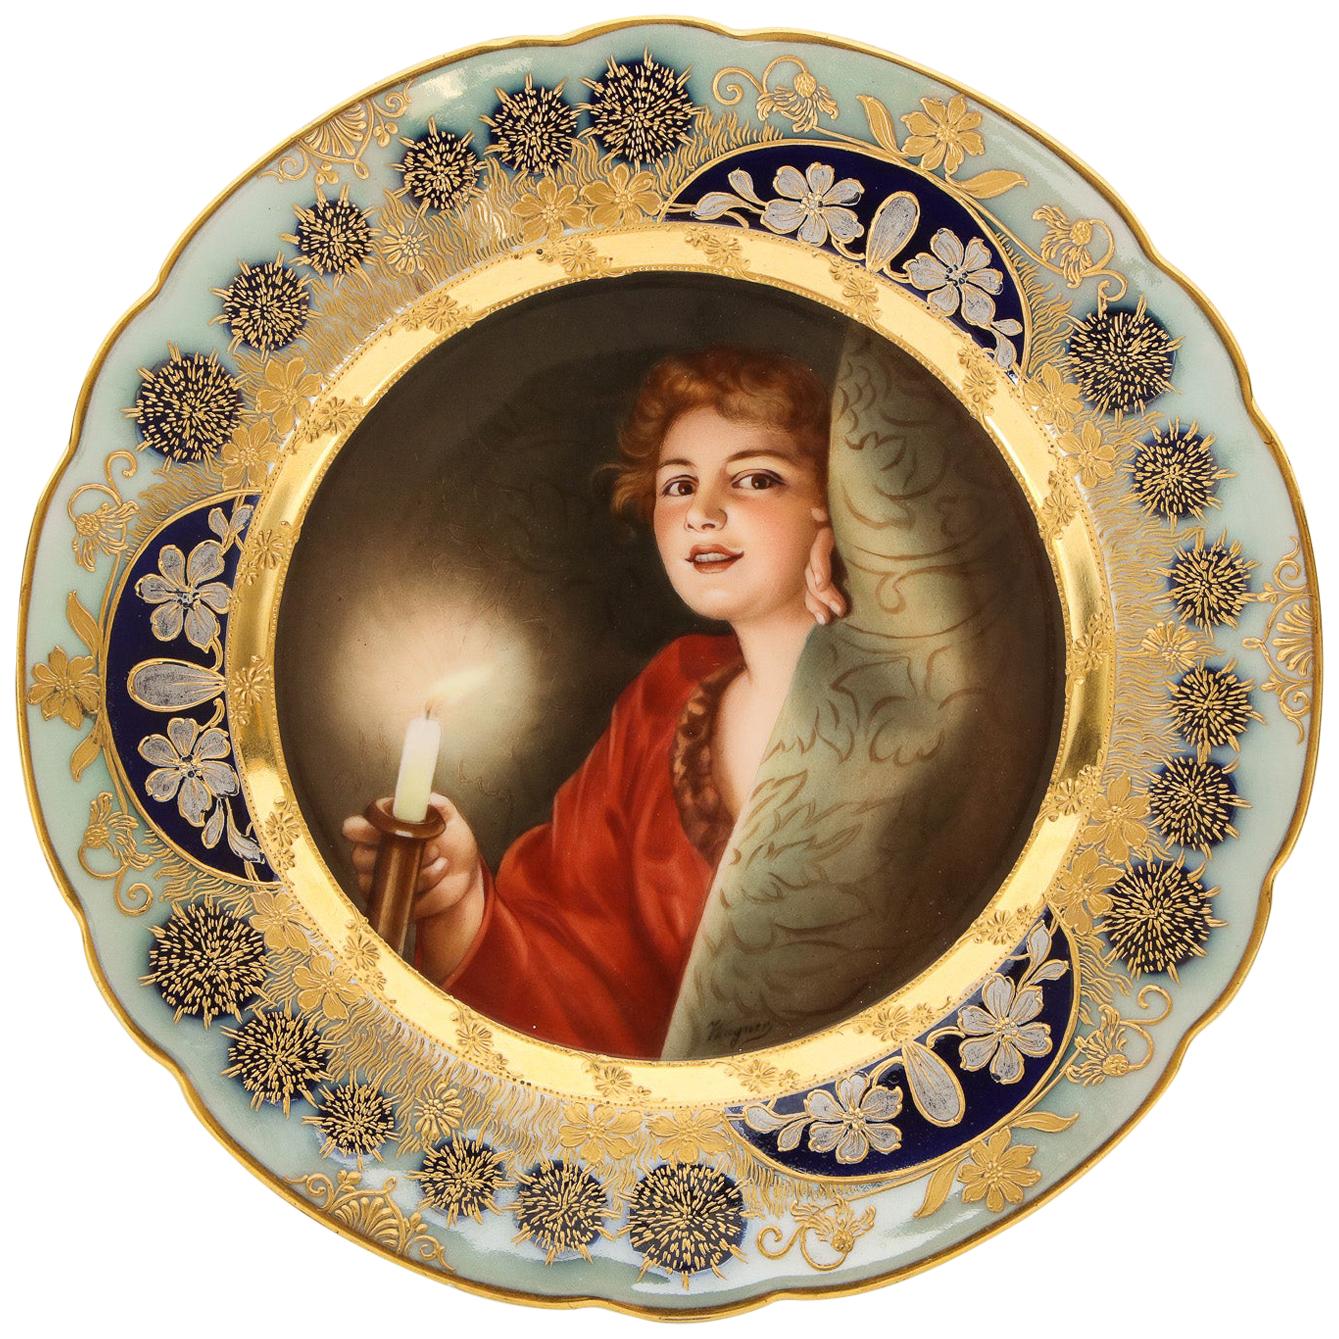 Rare and Exceptional Art Nouveau Royal Vienna Porcelain Plate by Wagner